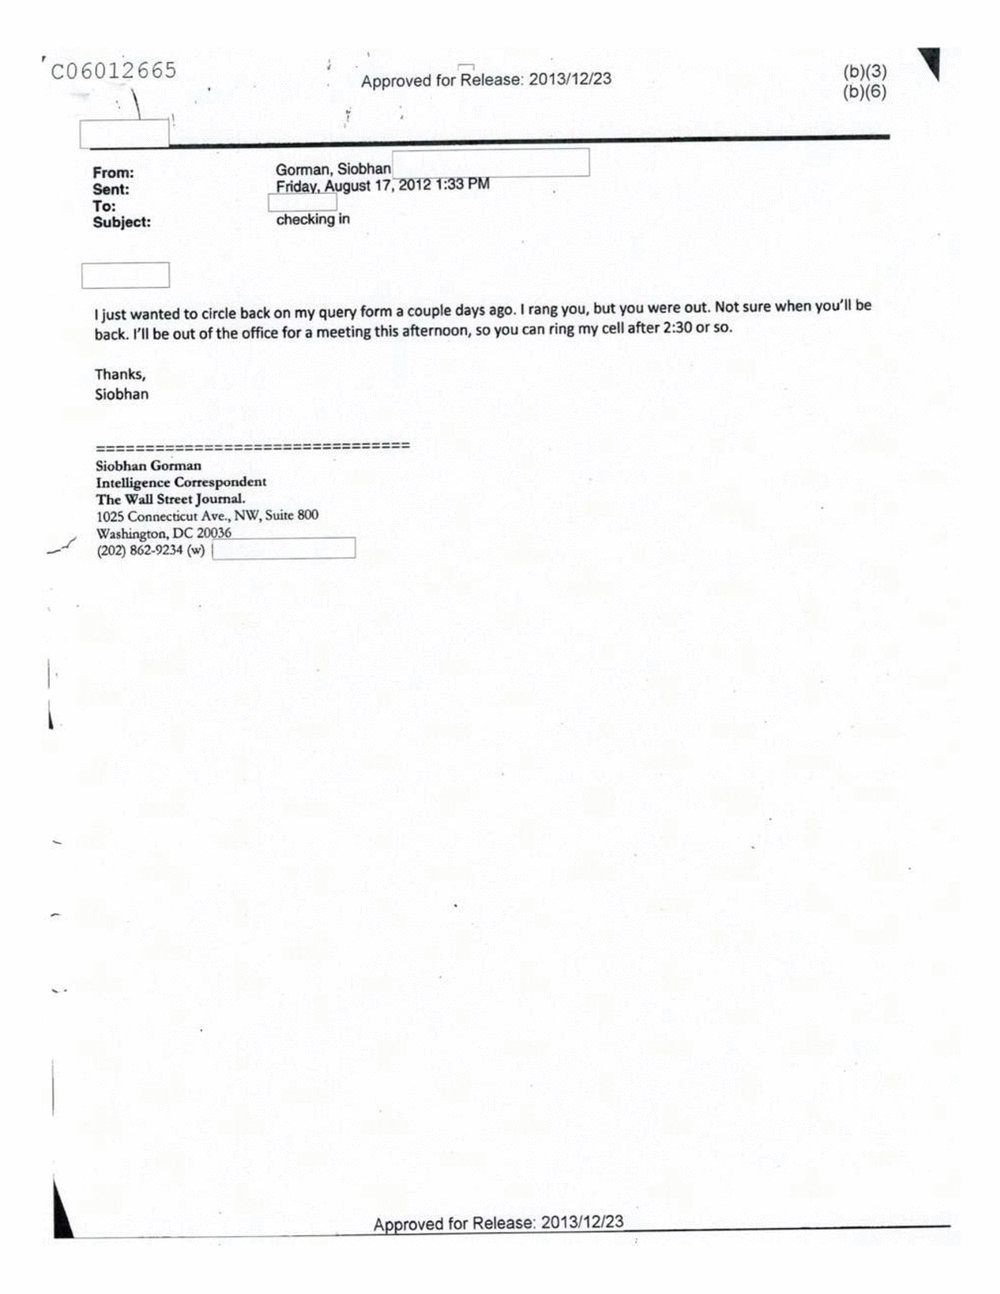 Page 246 from Email Correspondence Between Reporters and CIA Flacks